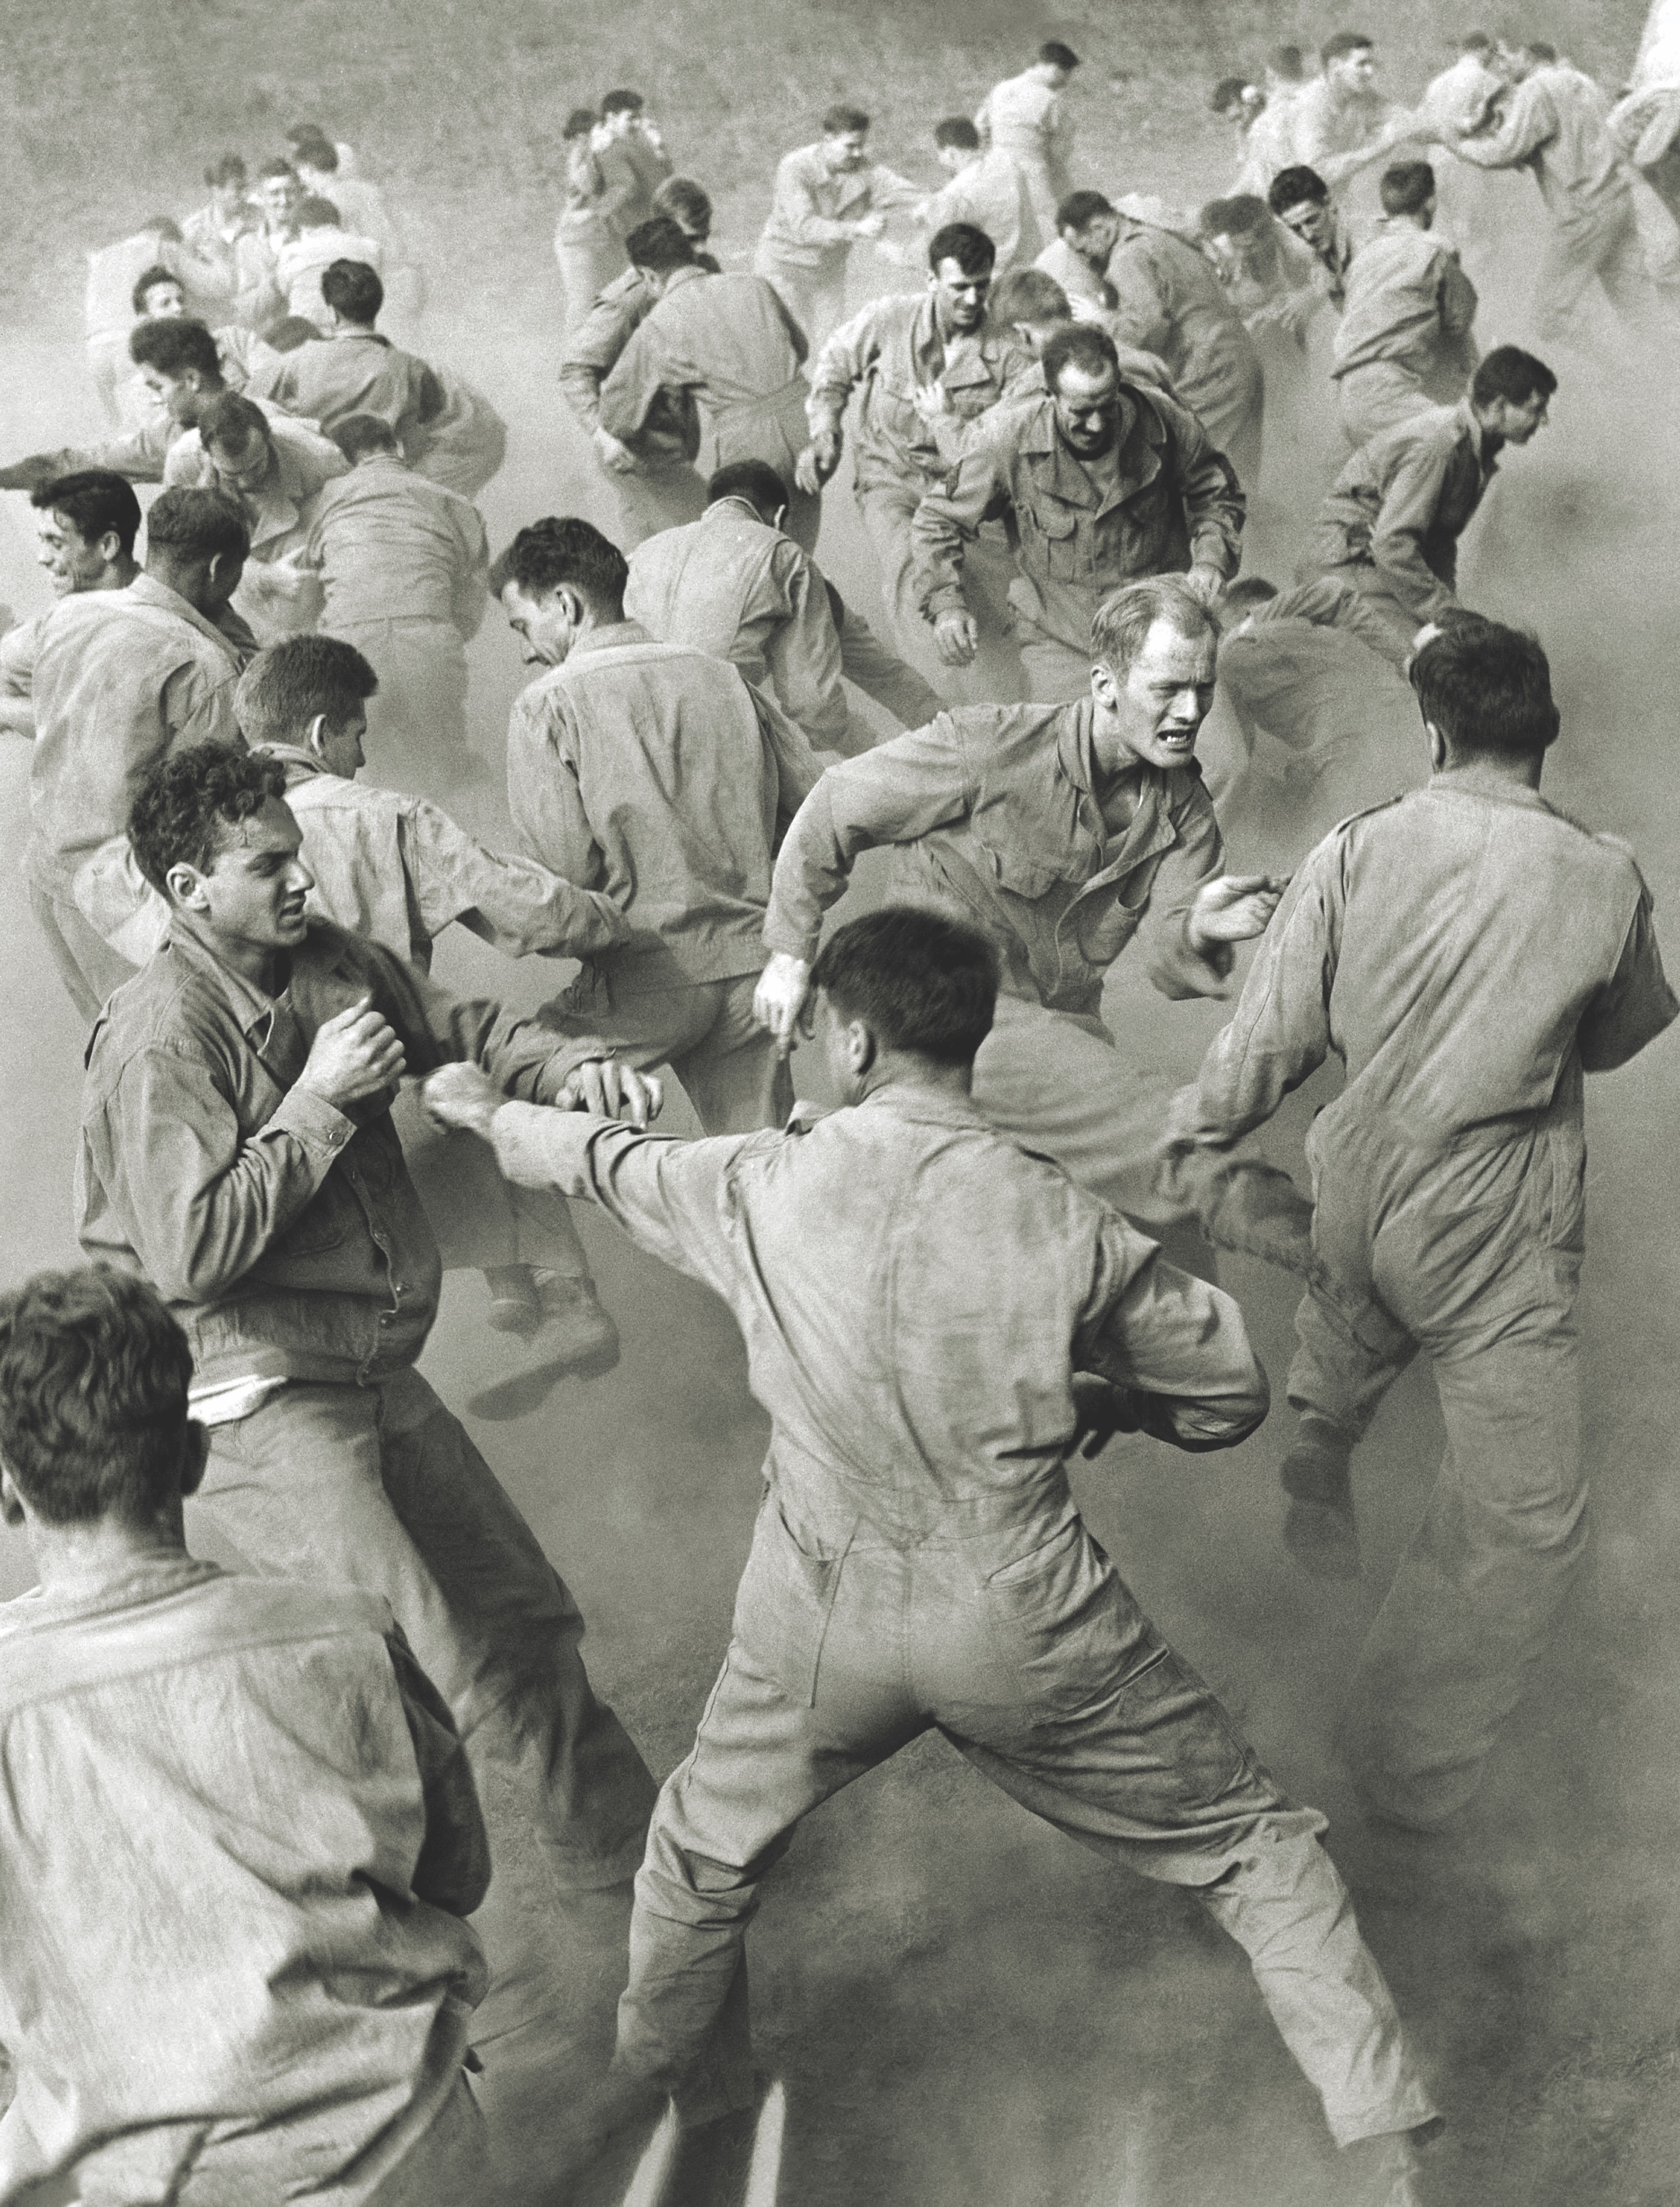 D’Eliscu’s training methods were sufficiently unorthodox for Life magazine to send a photographer to Fort Meade for a feature on what it called his “dirty fighting” system. (Everett Collection Inc./Alamy Stock Photo)